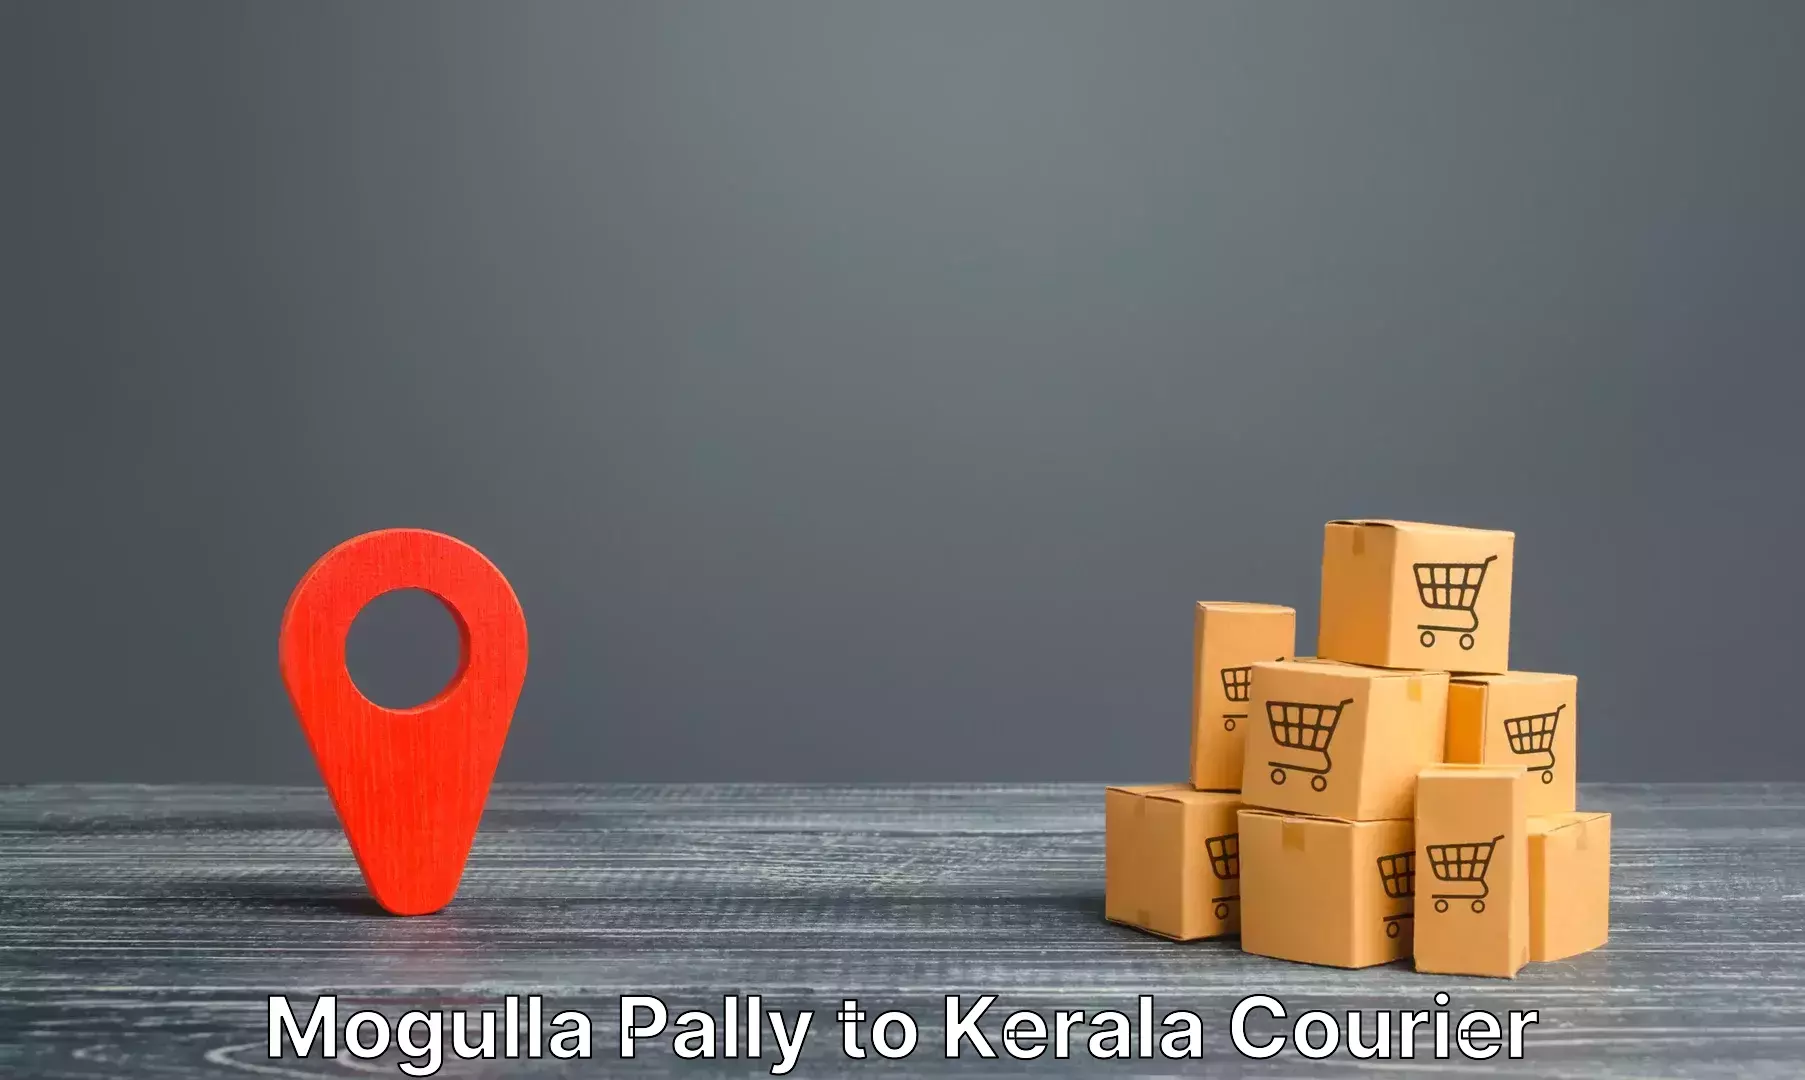 Express luggage delivery Mogulla Pally to Cochin